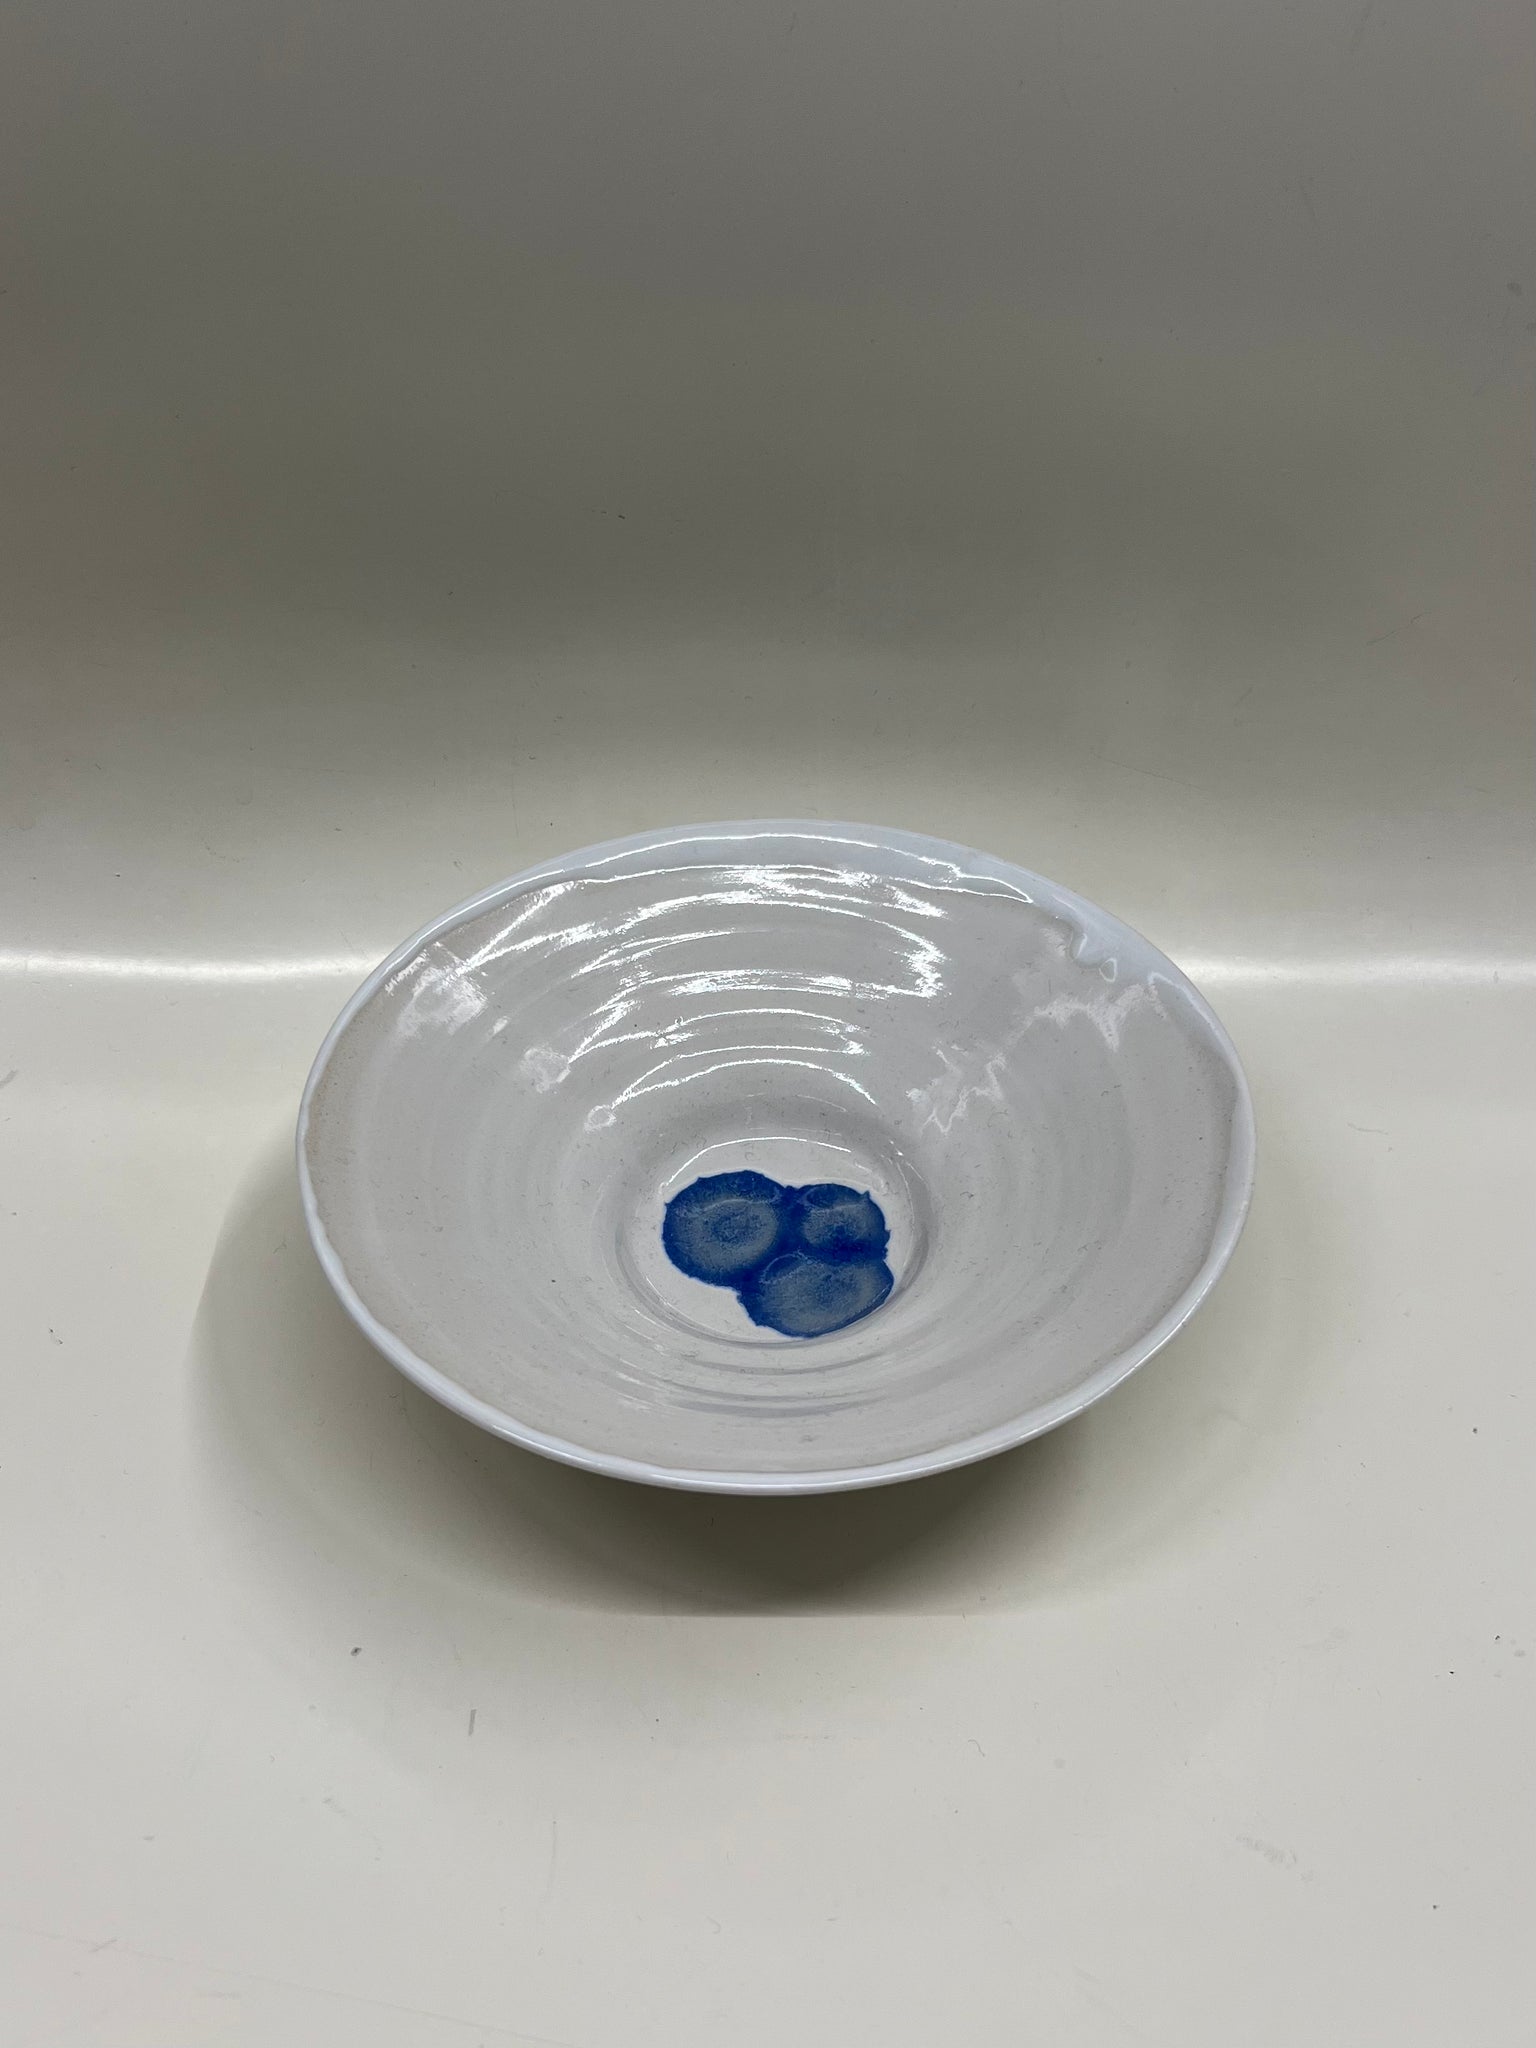 Small wide bowl in white with blue details by Jimu Kobayashi